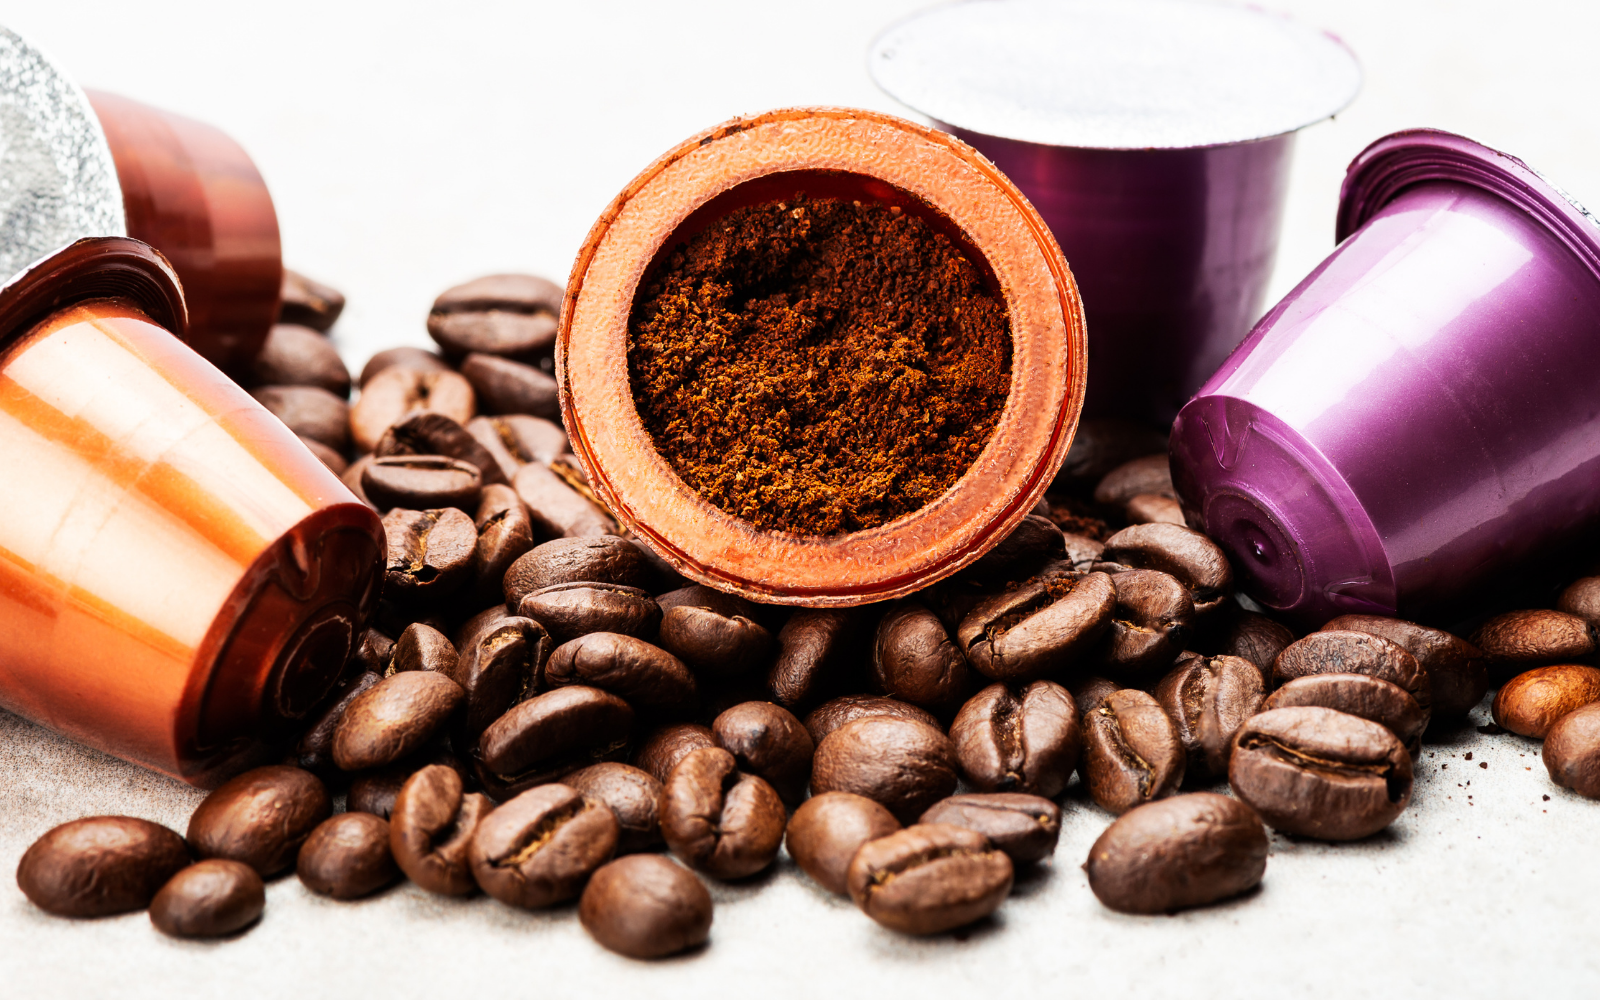 Coffee Beans Or Pods -  Which Is Better?